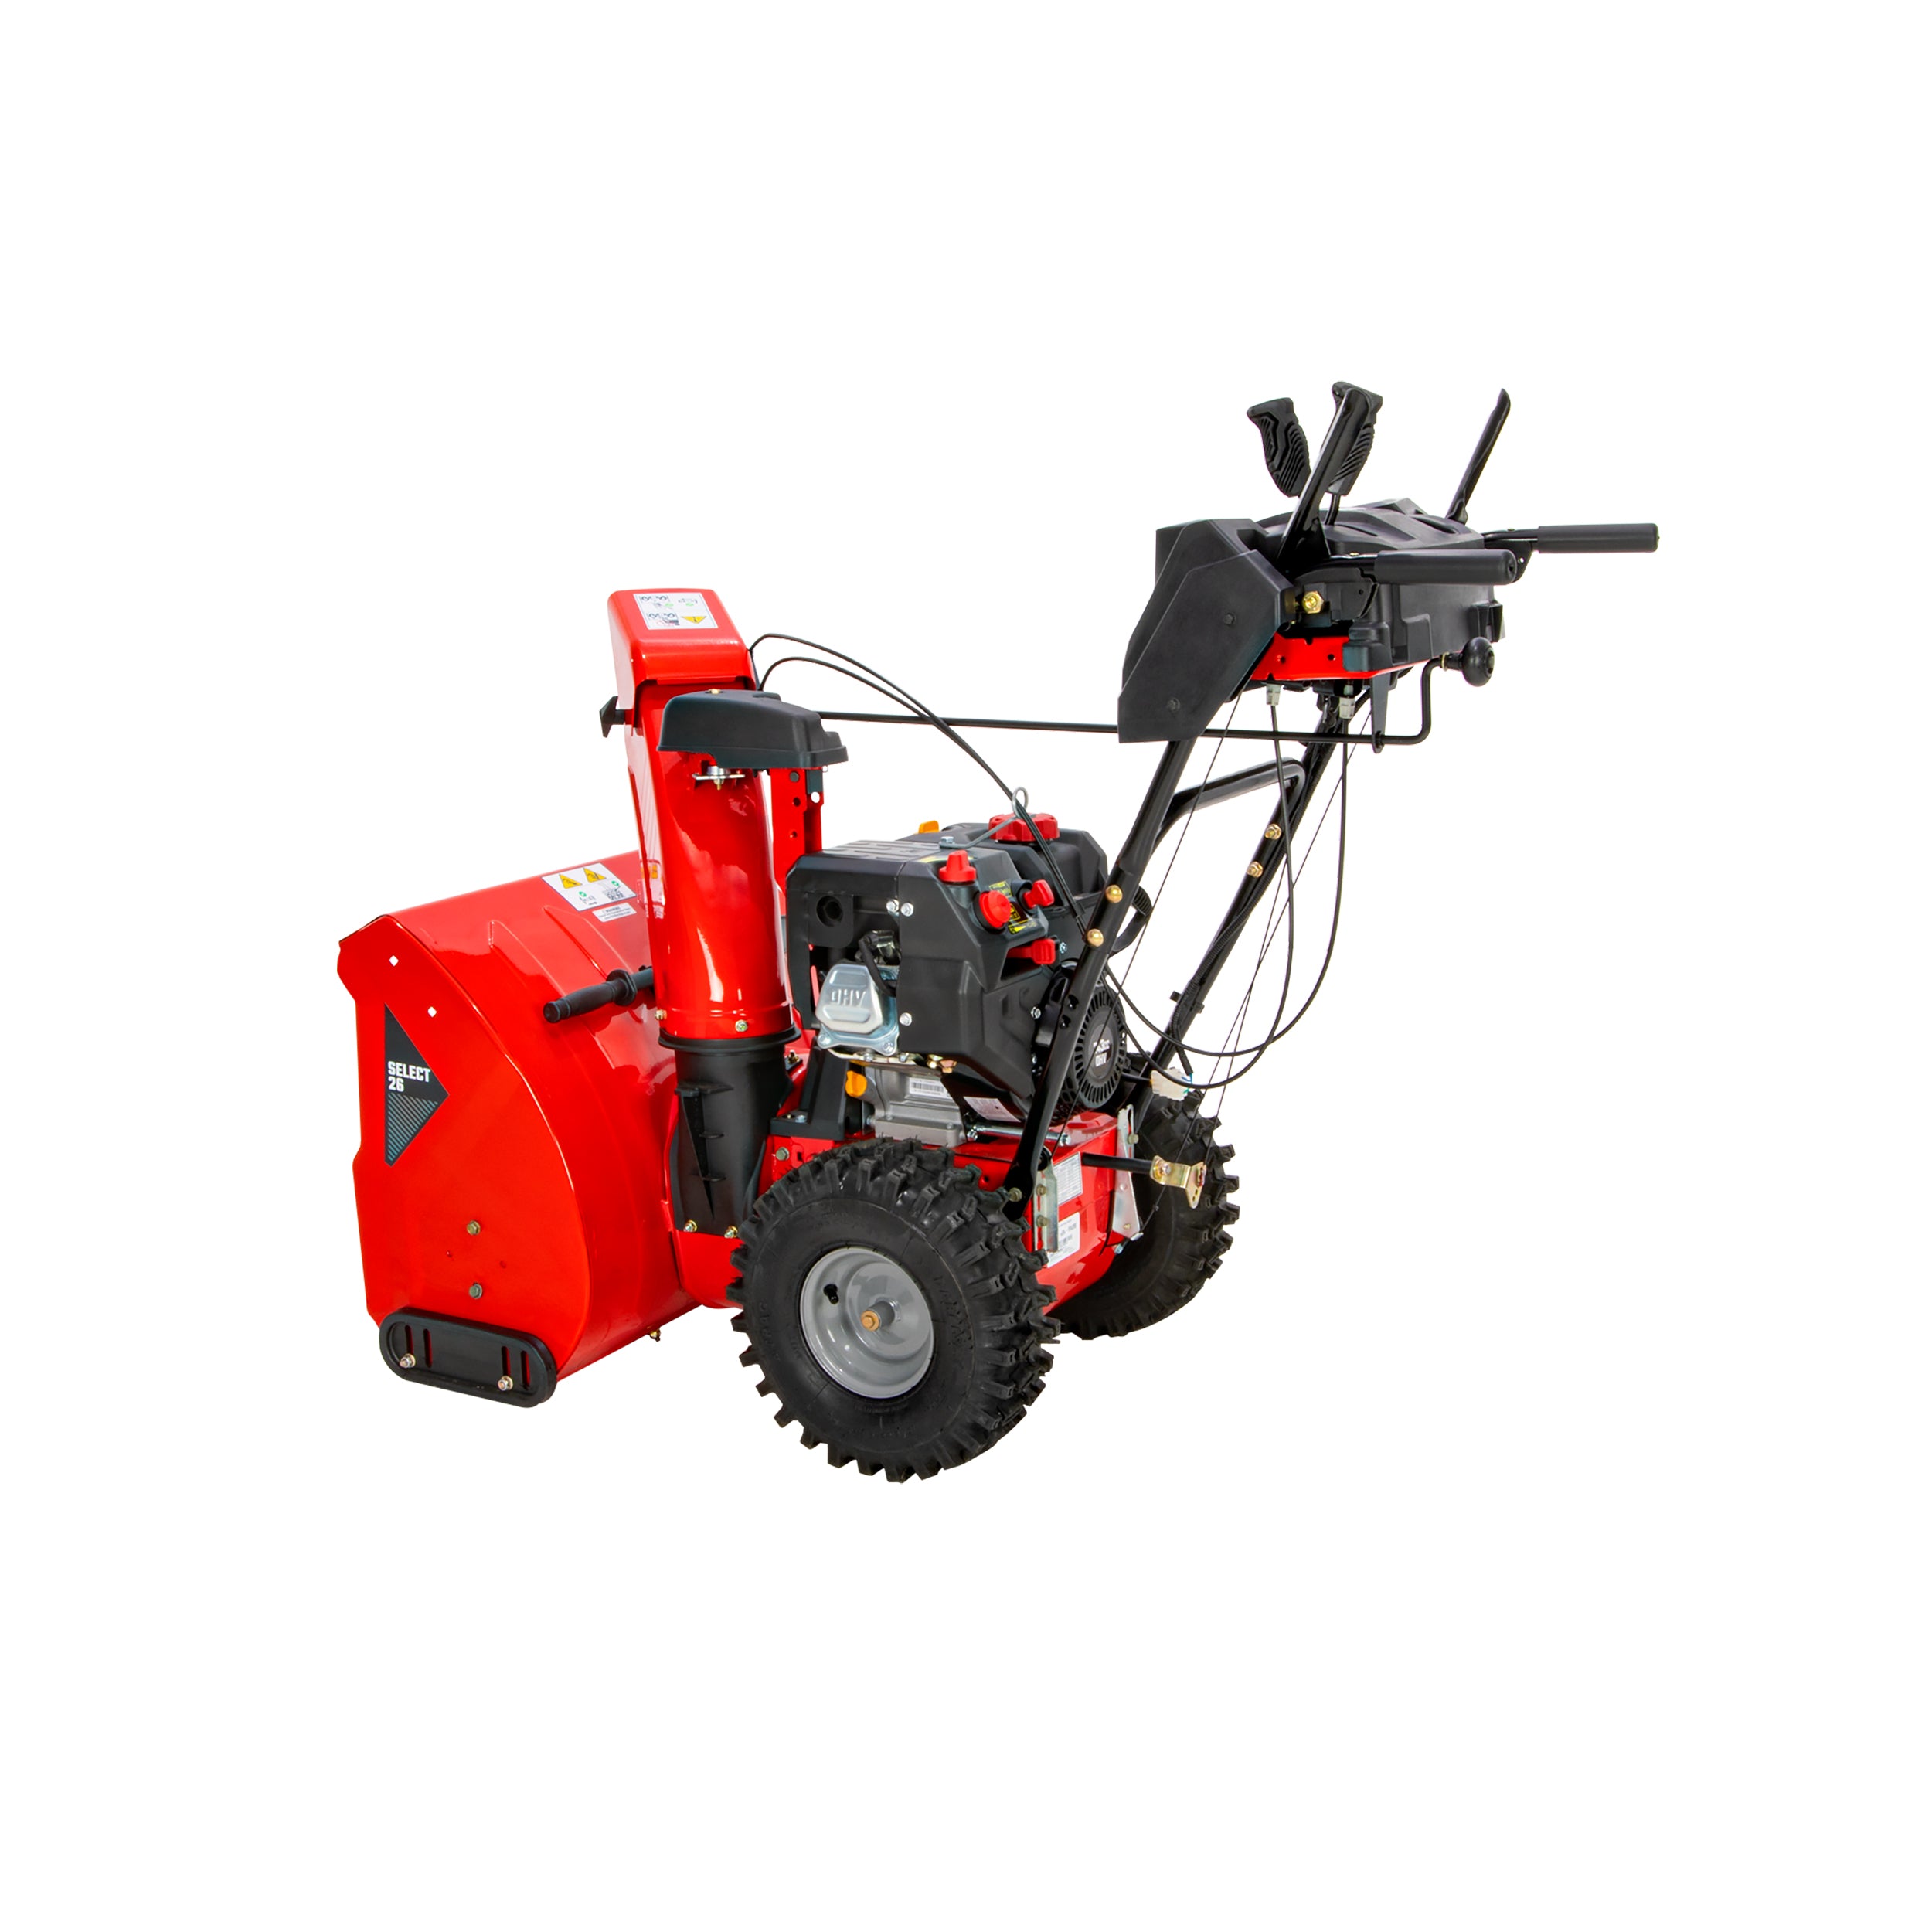 Shop CRAFTSMAN Select 26-in 2-stage Gas Snow Blower, Leaf Blower at